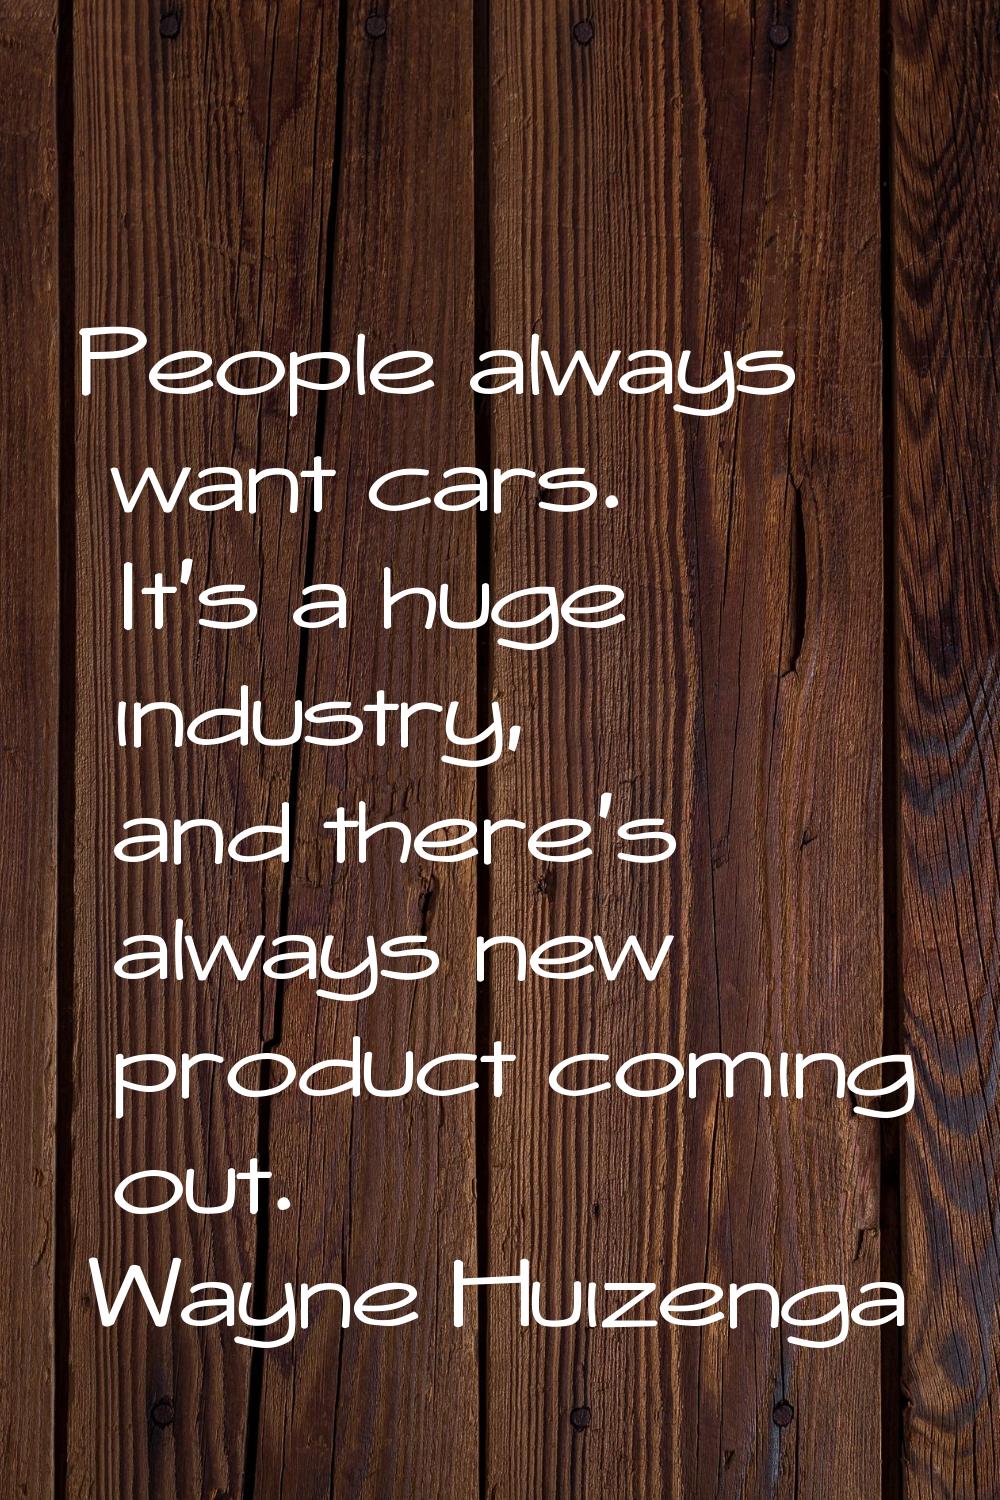 People always want cars. It's a huge industry, and there's always new product coming out.